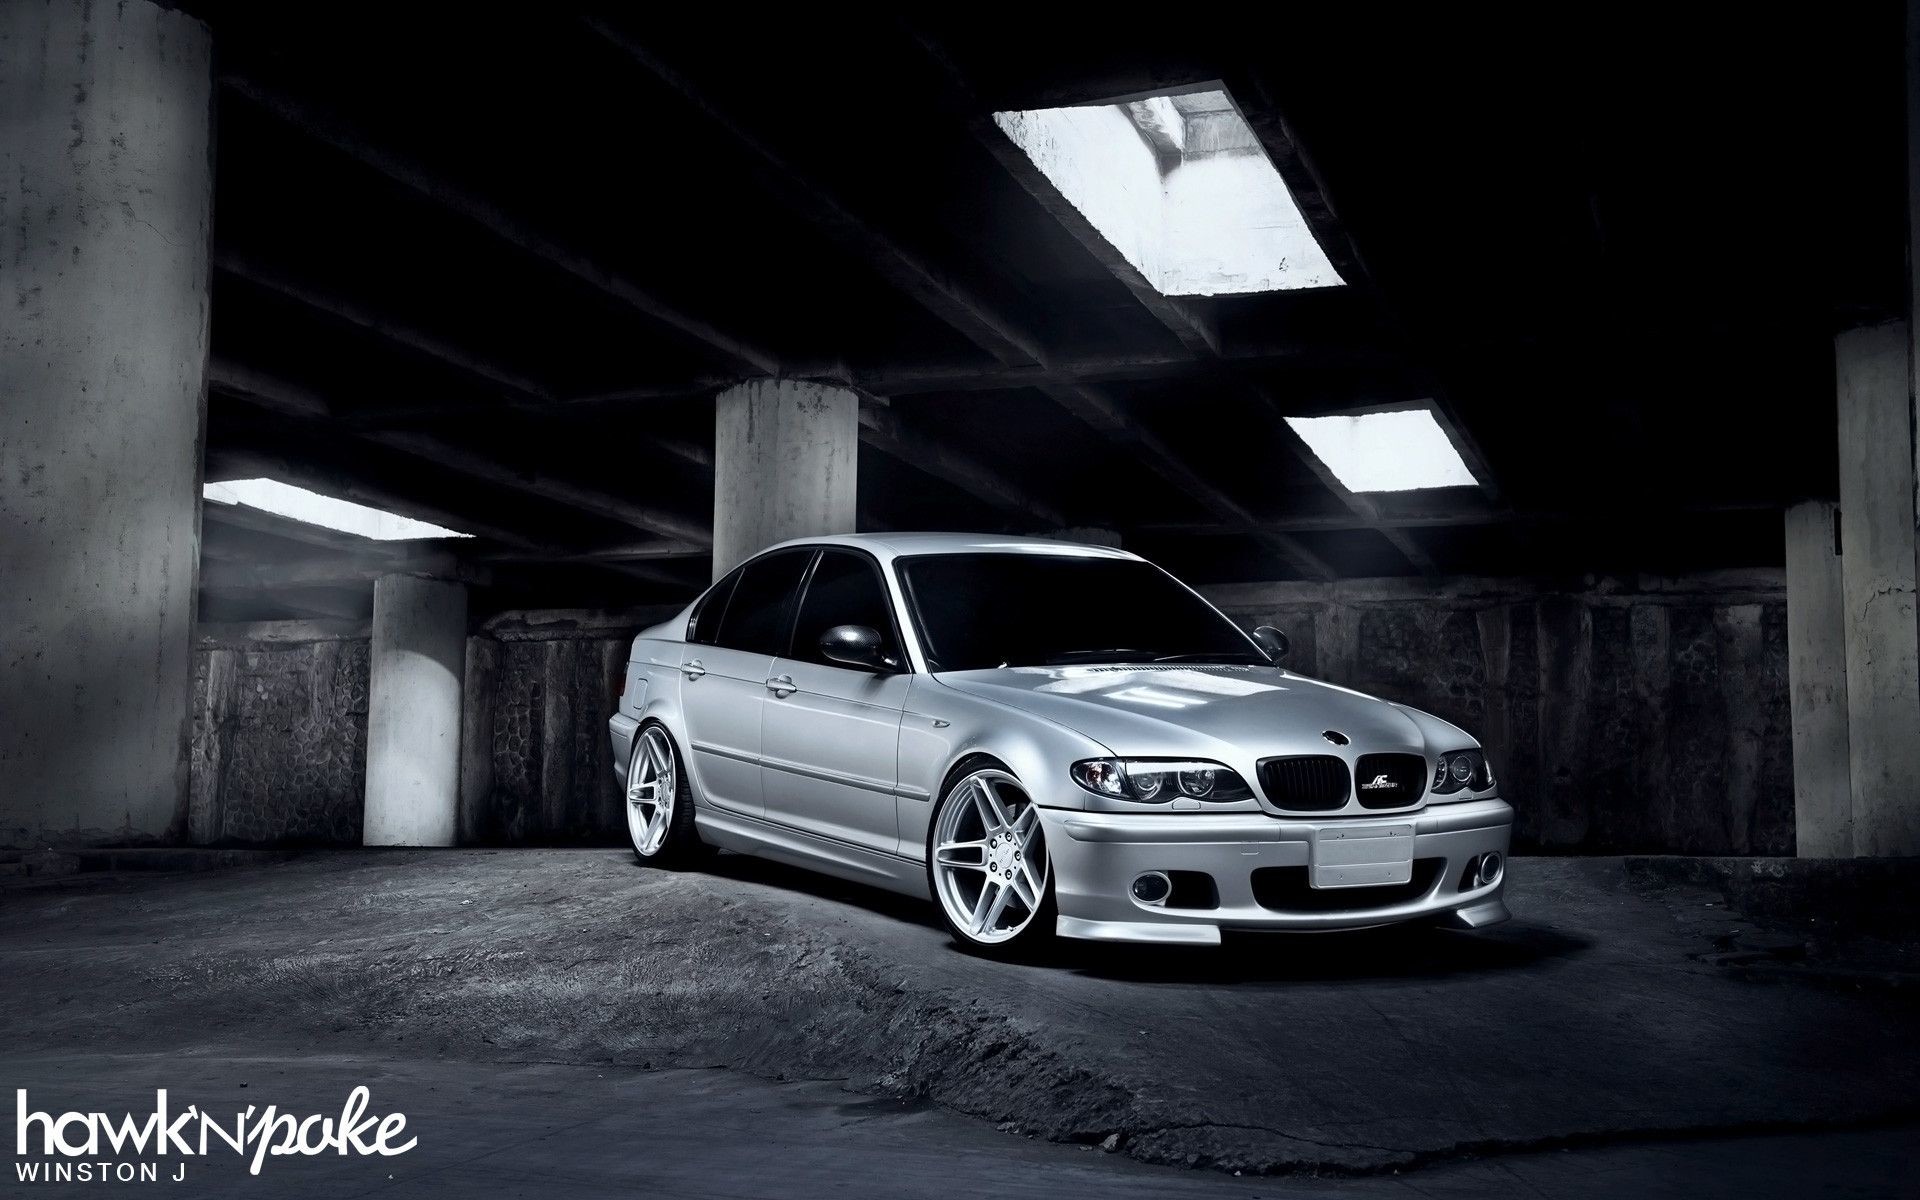 Wallpaper  1680x1050 px BMW E46 BMW M3 e46 1680x1050  CoolWallpapers   688651  HD Wallpapers  WallHere